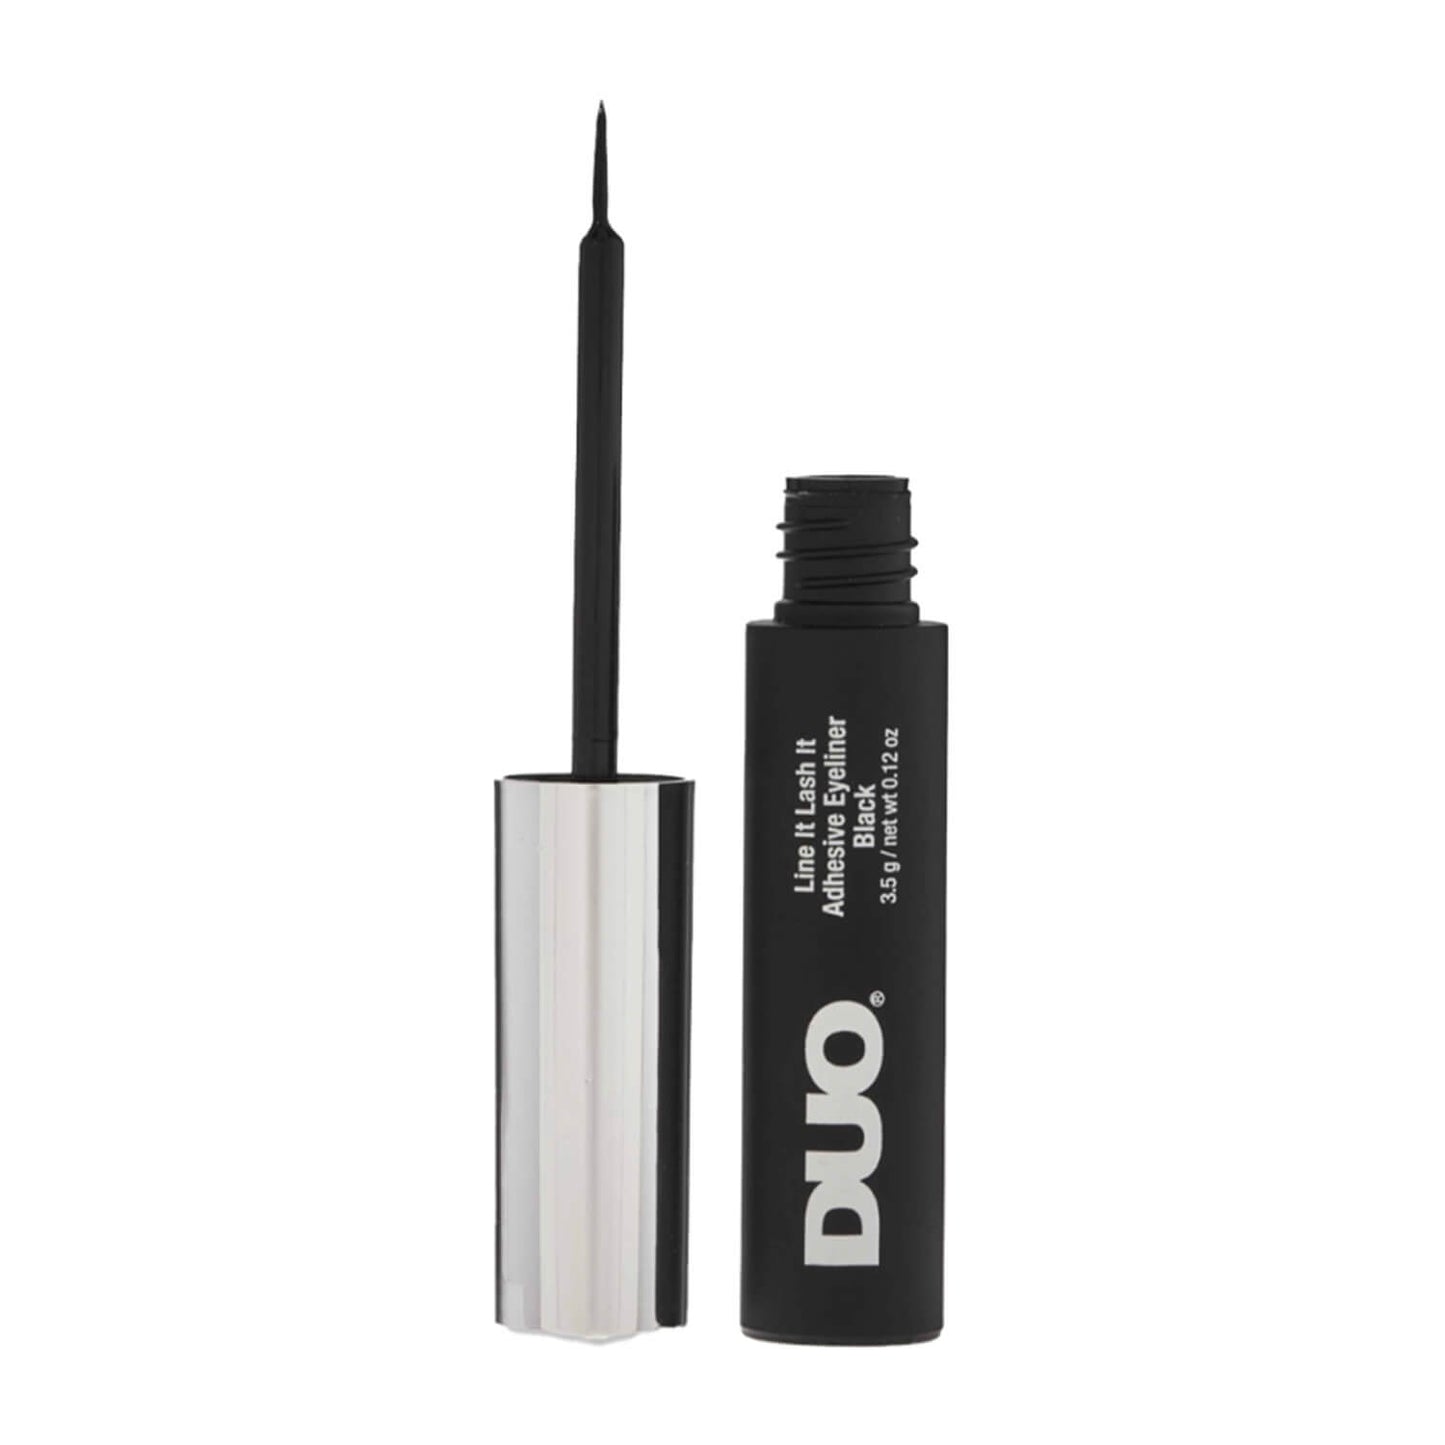 Shop ardell eye liner and lash adhesive available at Heygirl.pk for delivery in Pakistan